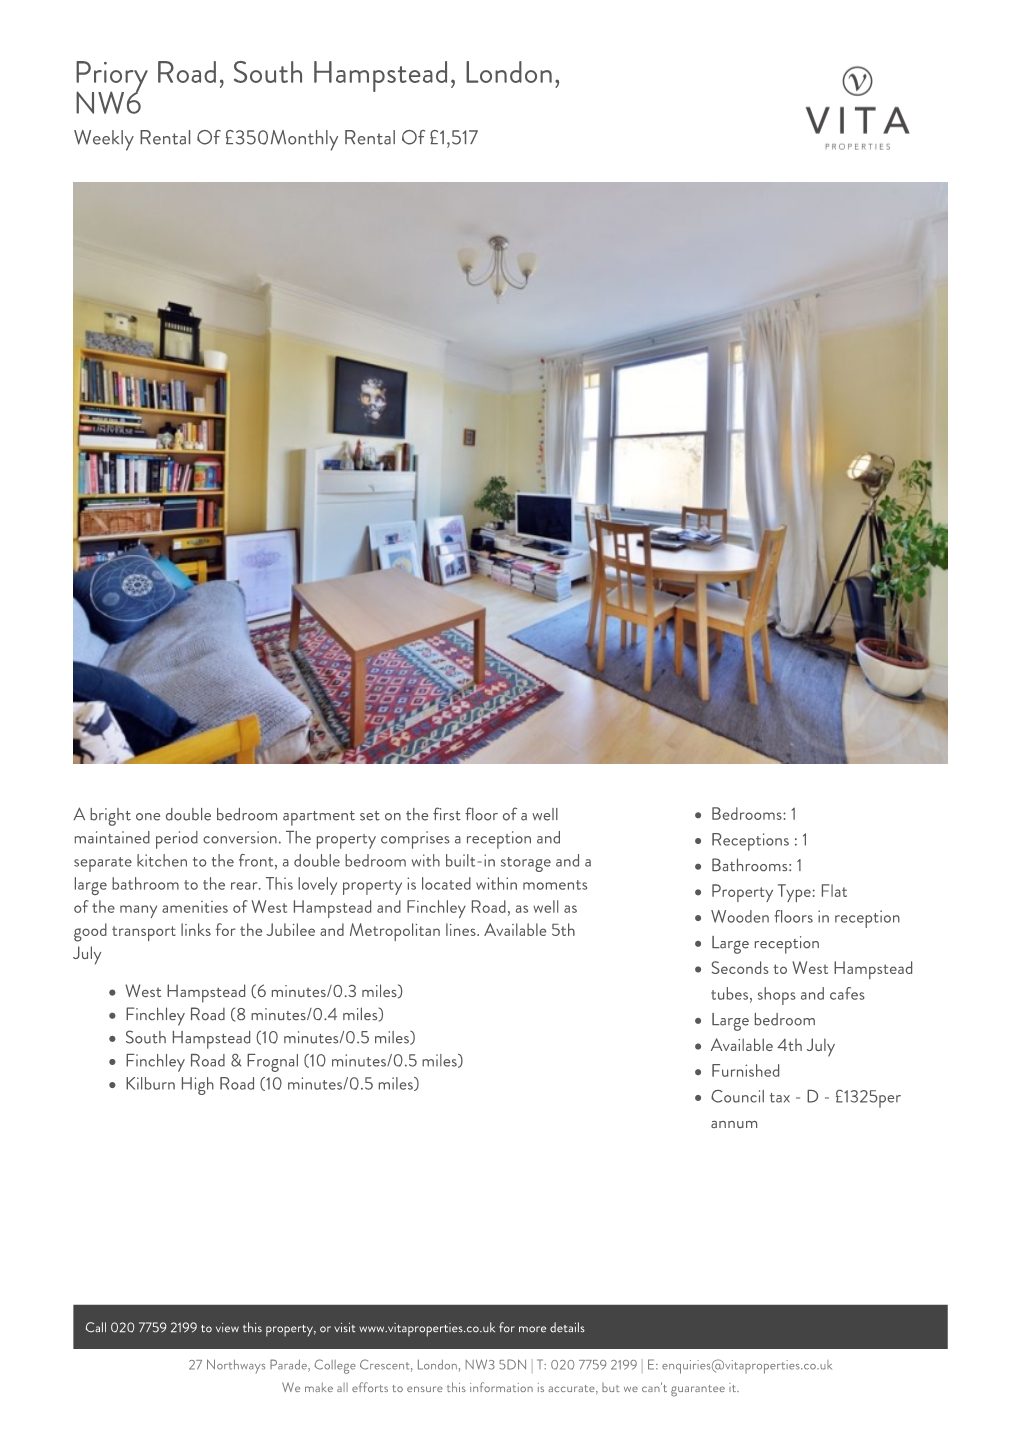 Priory Road, South Hampstead, London, NW6 Weekly Rental of £350Monthly Rental of £1,517